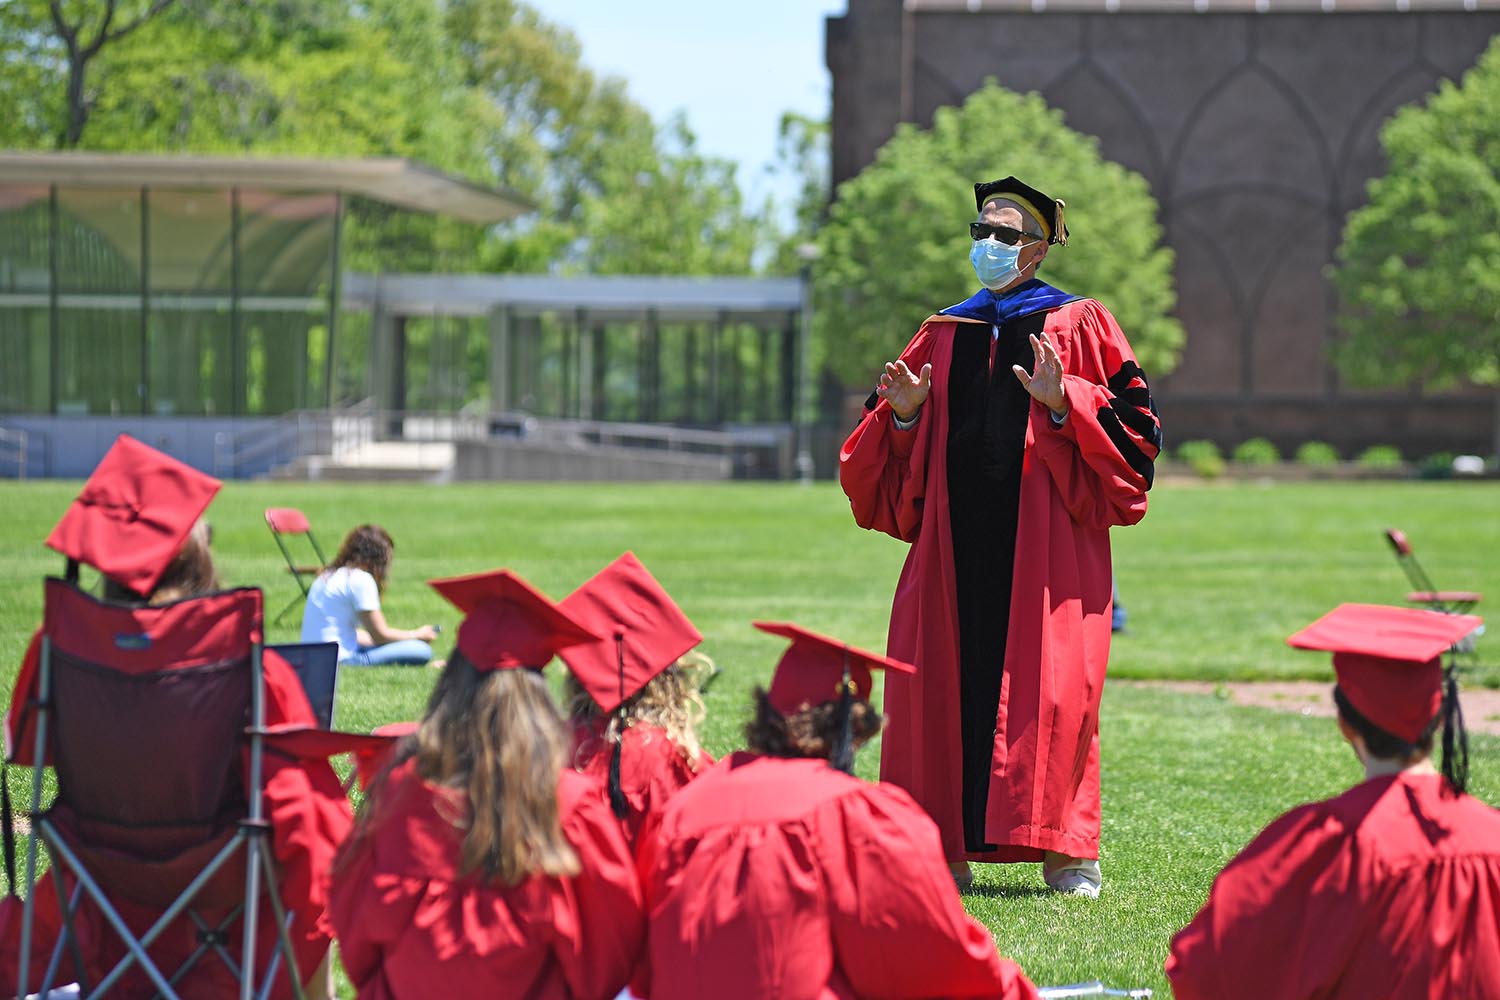 Wesleyan University held its 188th Commencement ceremony on Sunday, May 24. President Michael Roth ’78 delivered live, on-campus remarks to a large virtual audience and a small gathering of socially-distanced in-person groups of graduates and onlookers.